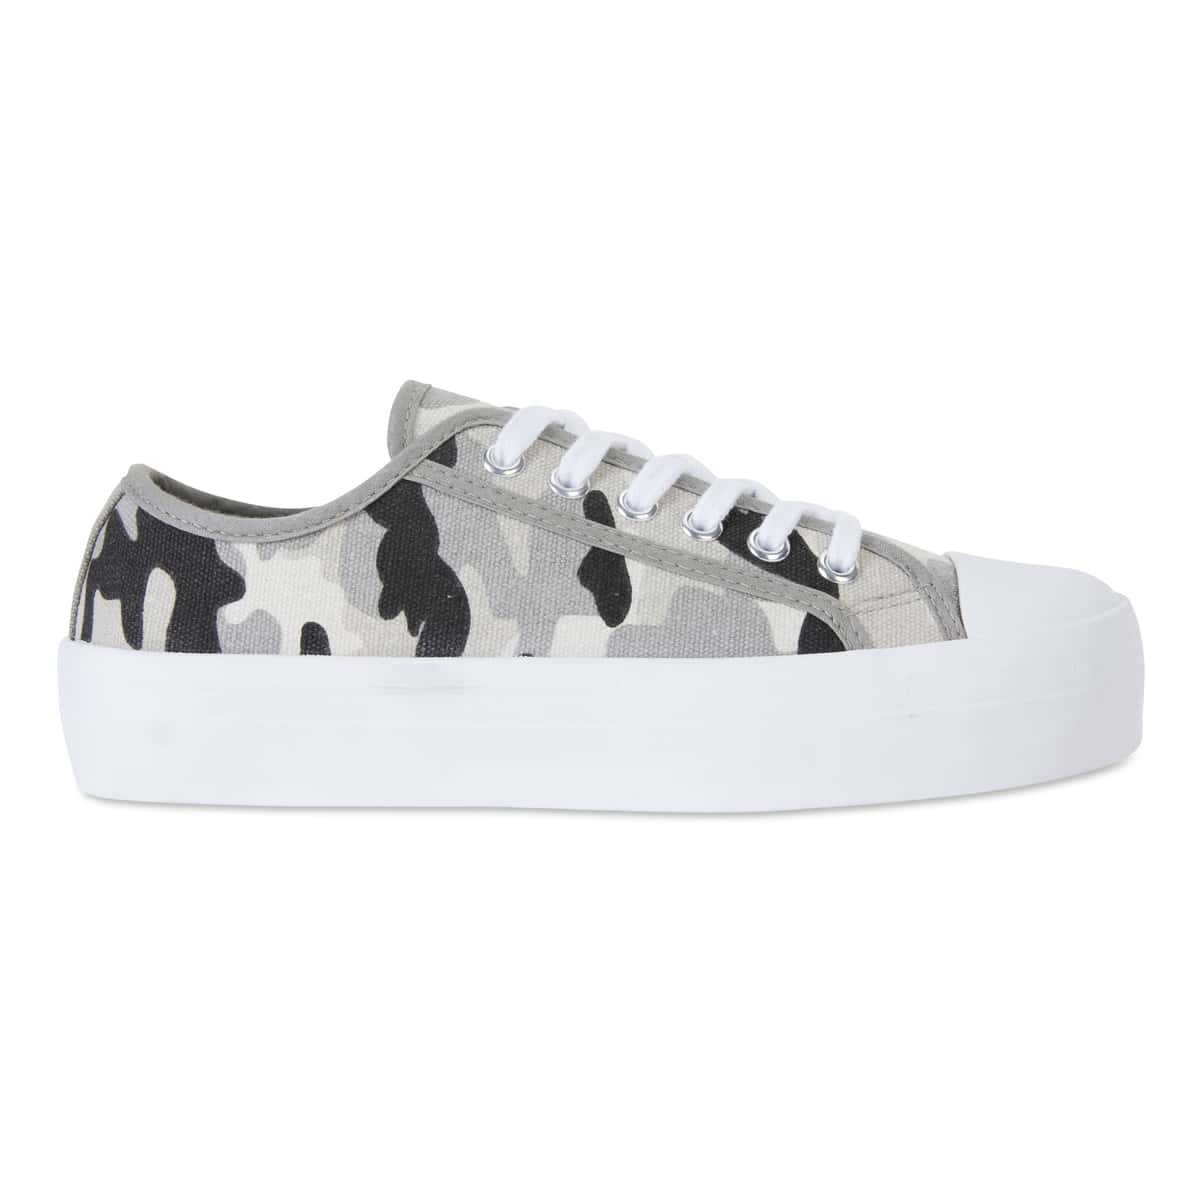 Stacey Sneaker in Light Camouflage Canvas